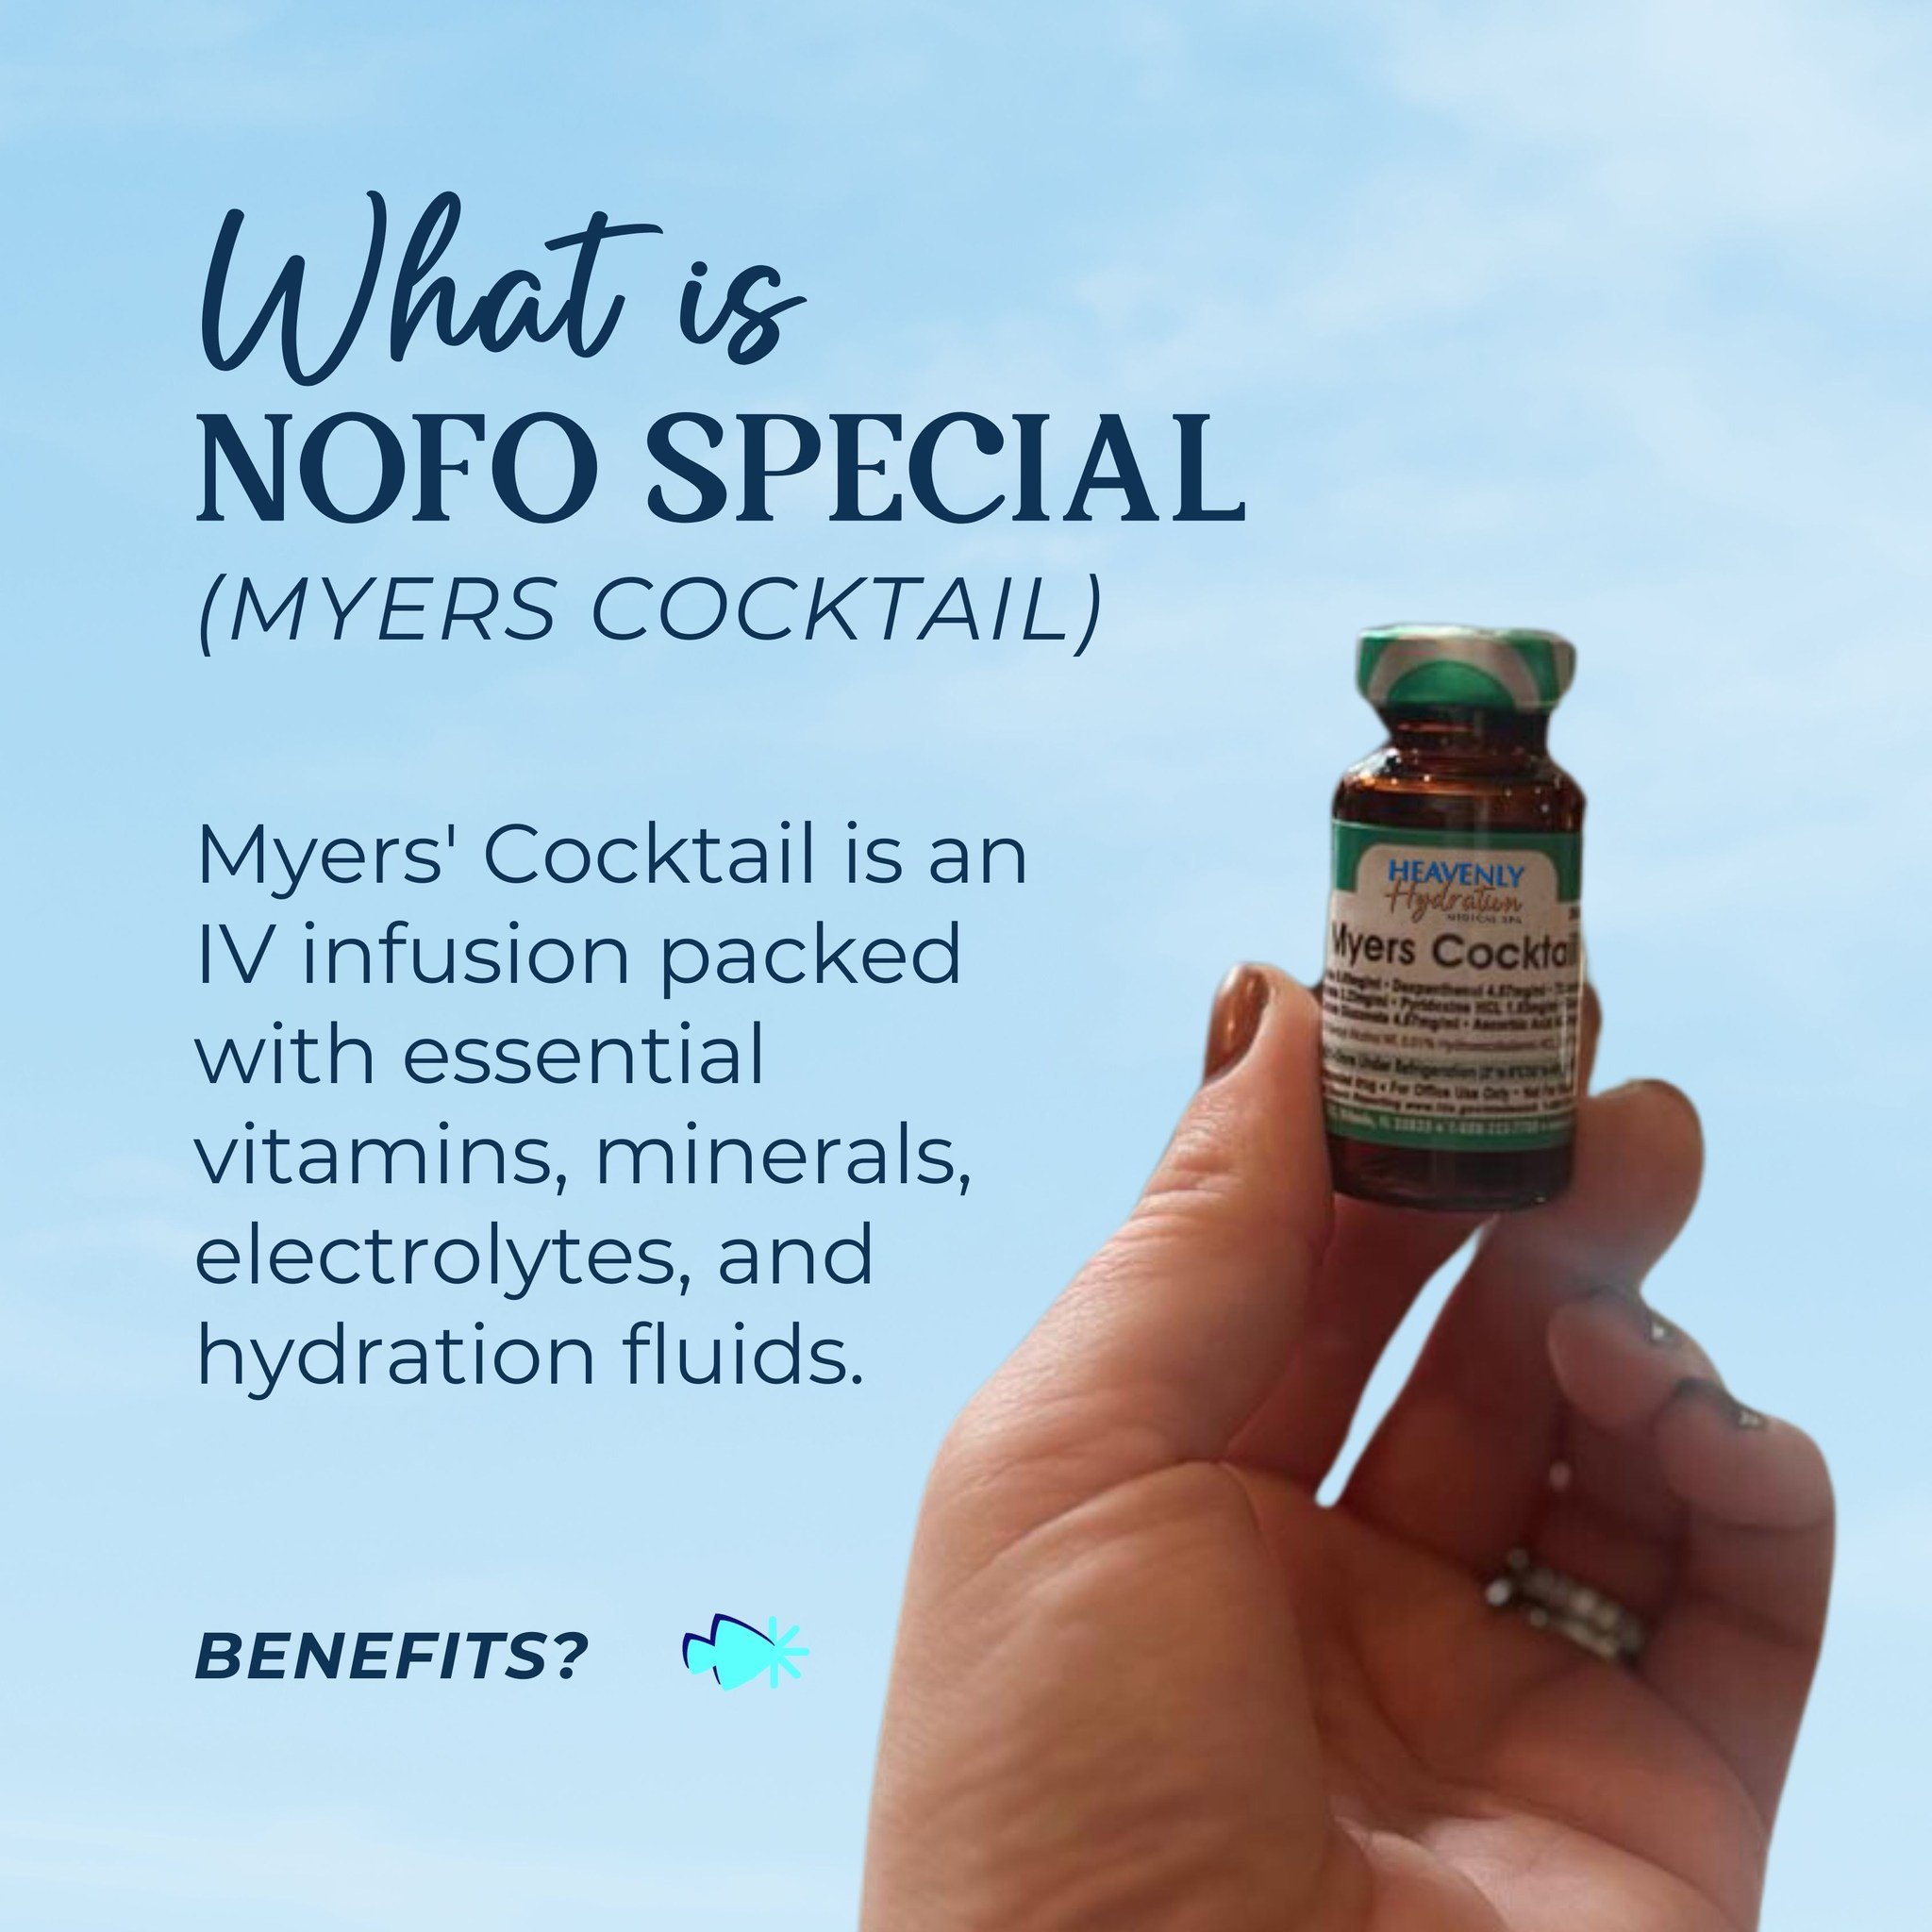 Fight fatigue, boost immunity &amp; more! The Myers Cocktail IV delivers essential nutrients for optimal well-being. 

Contact us to discuss if it's right for you ✨💙

Don't forget to follow us! 💙

#heavenlyhydrationli #myerscocktailivdrip #healthyl